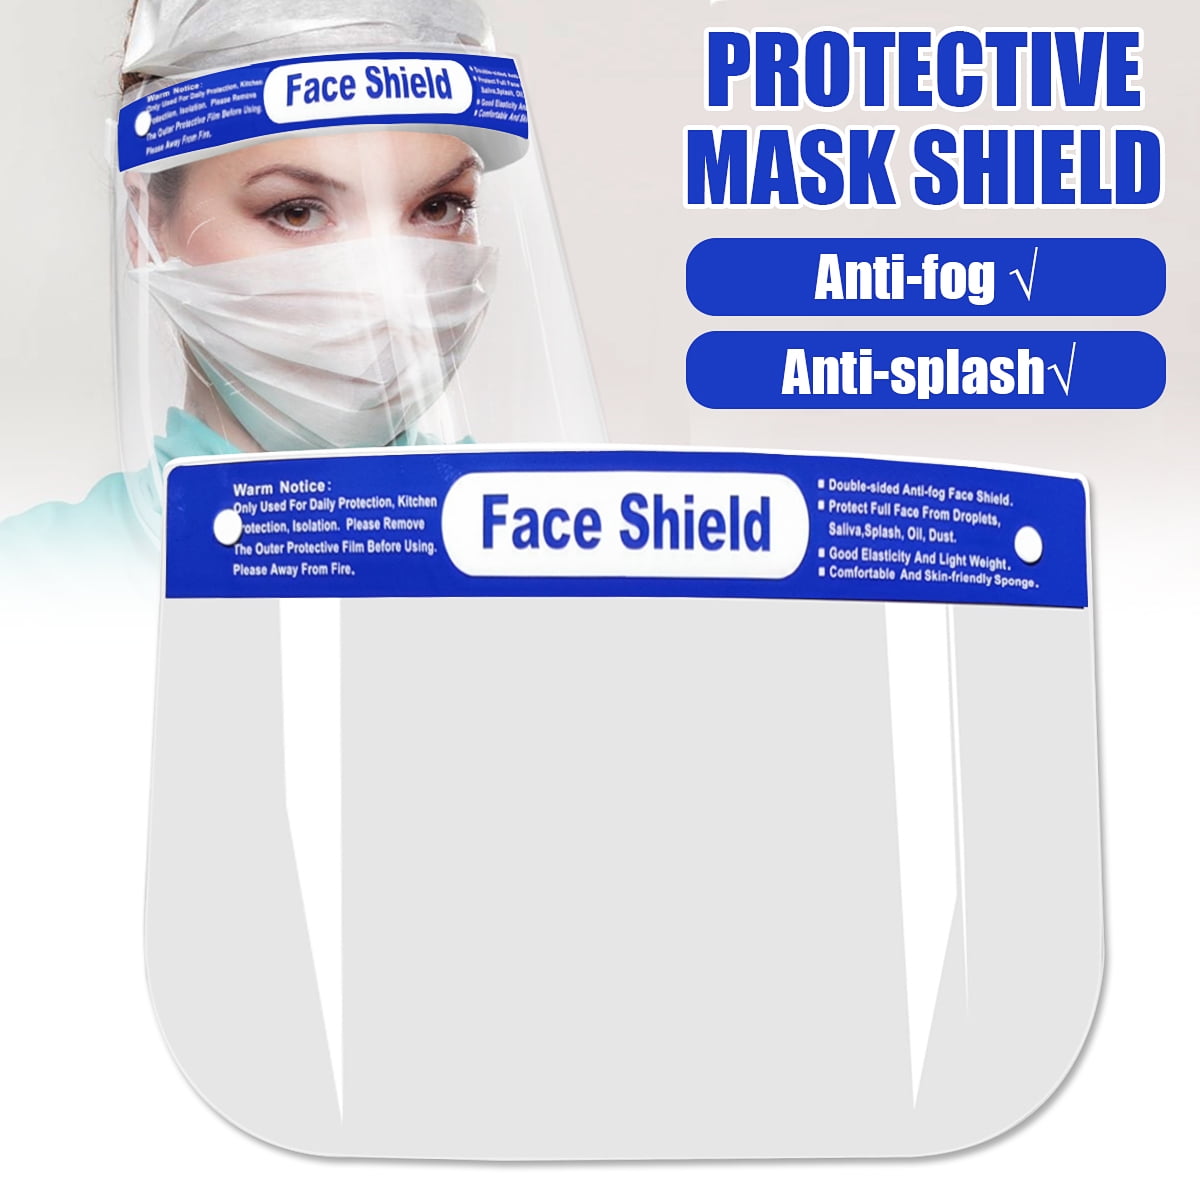 Full Face Shield Mask Clear Protective Film Flip Up Visor Safety Cover Anti-Fog 